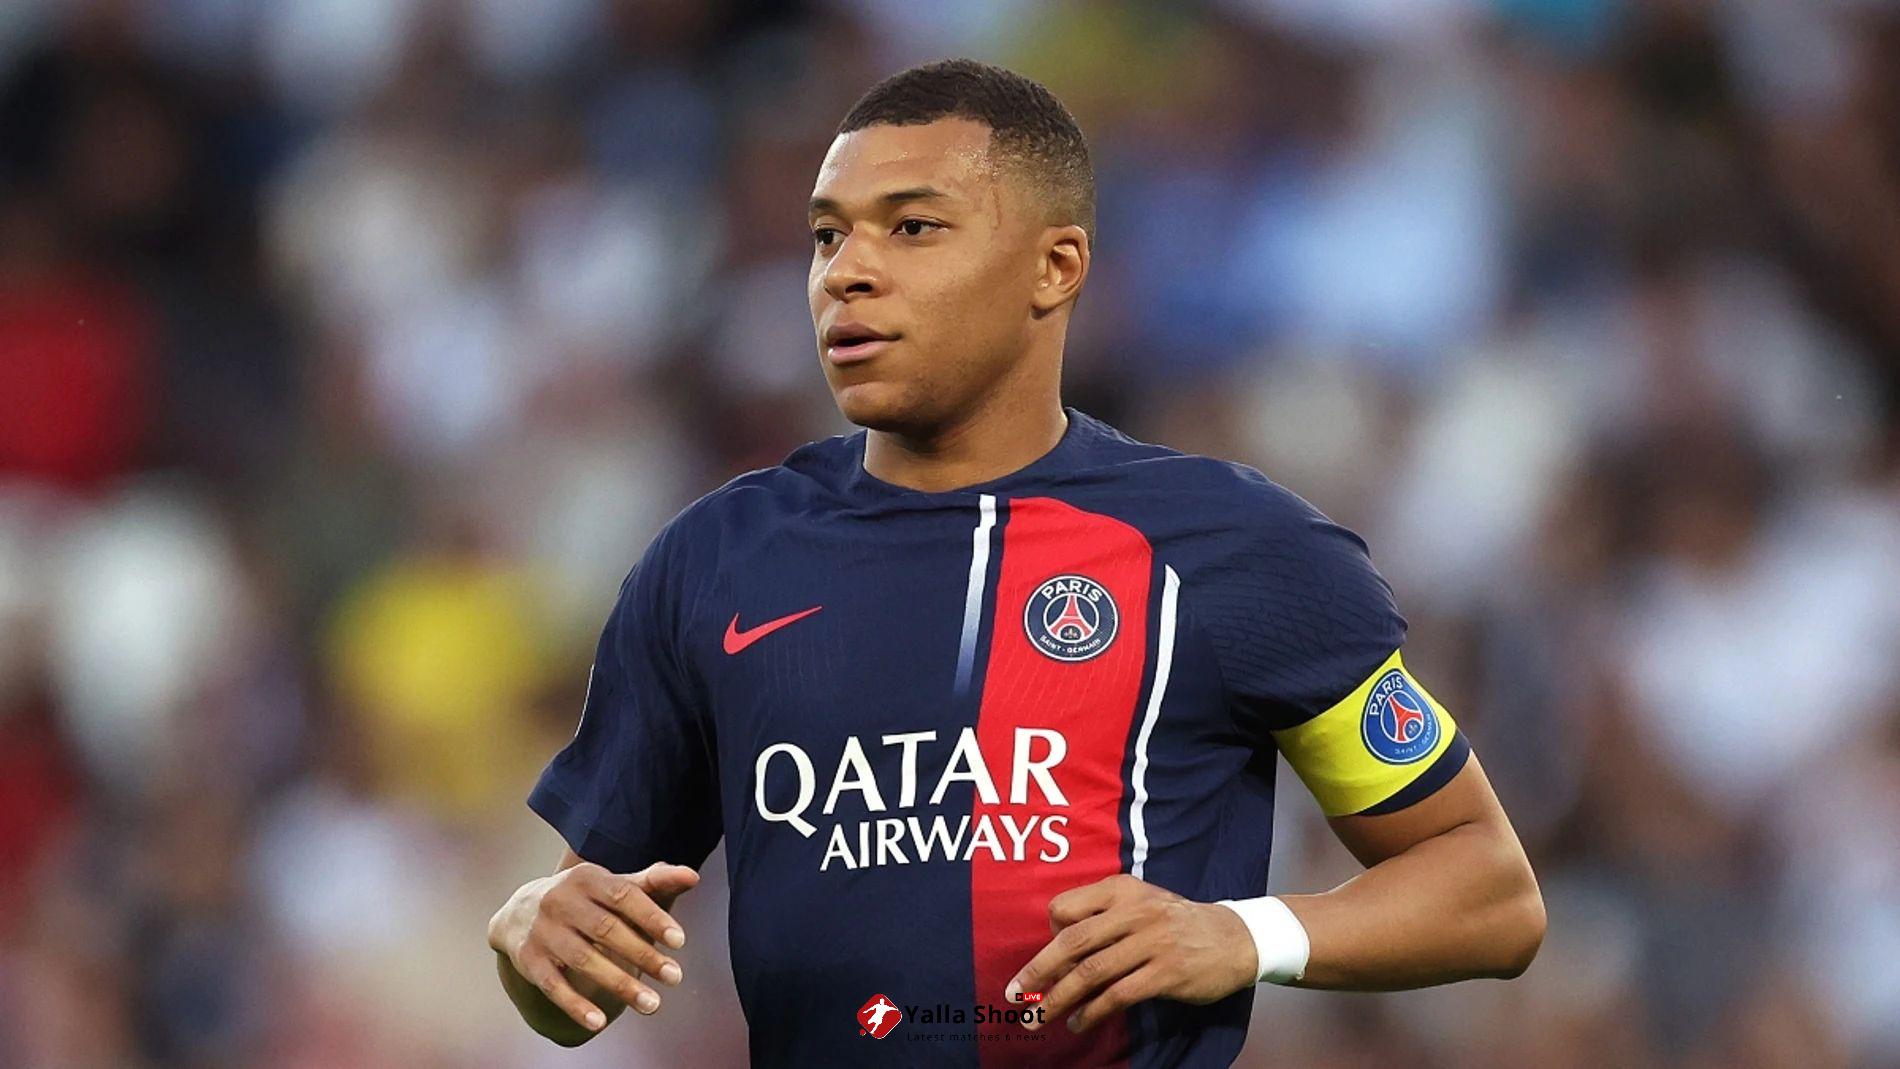 Paris Saint-Germain preparing to lose Kylian Mbappe amid Real Madrid interest, replacement already lined up